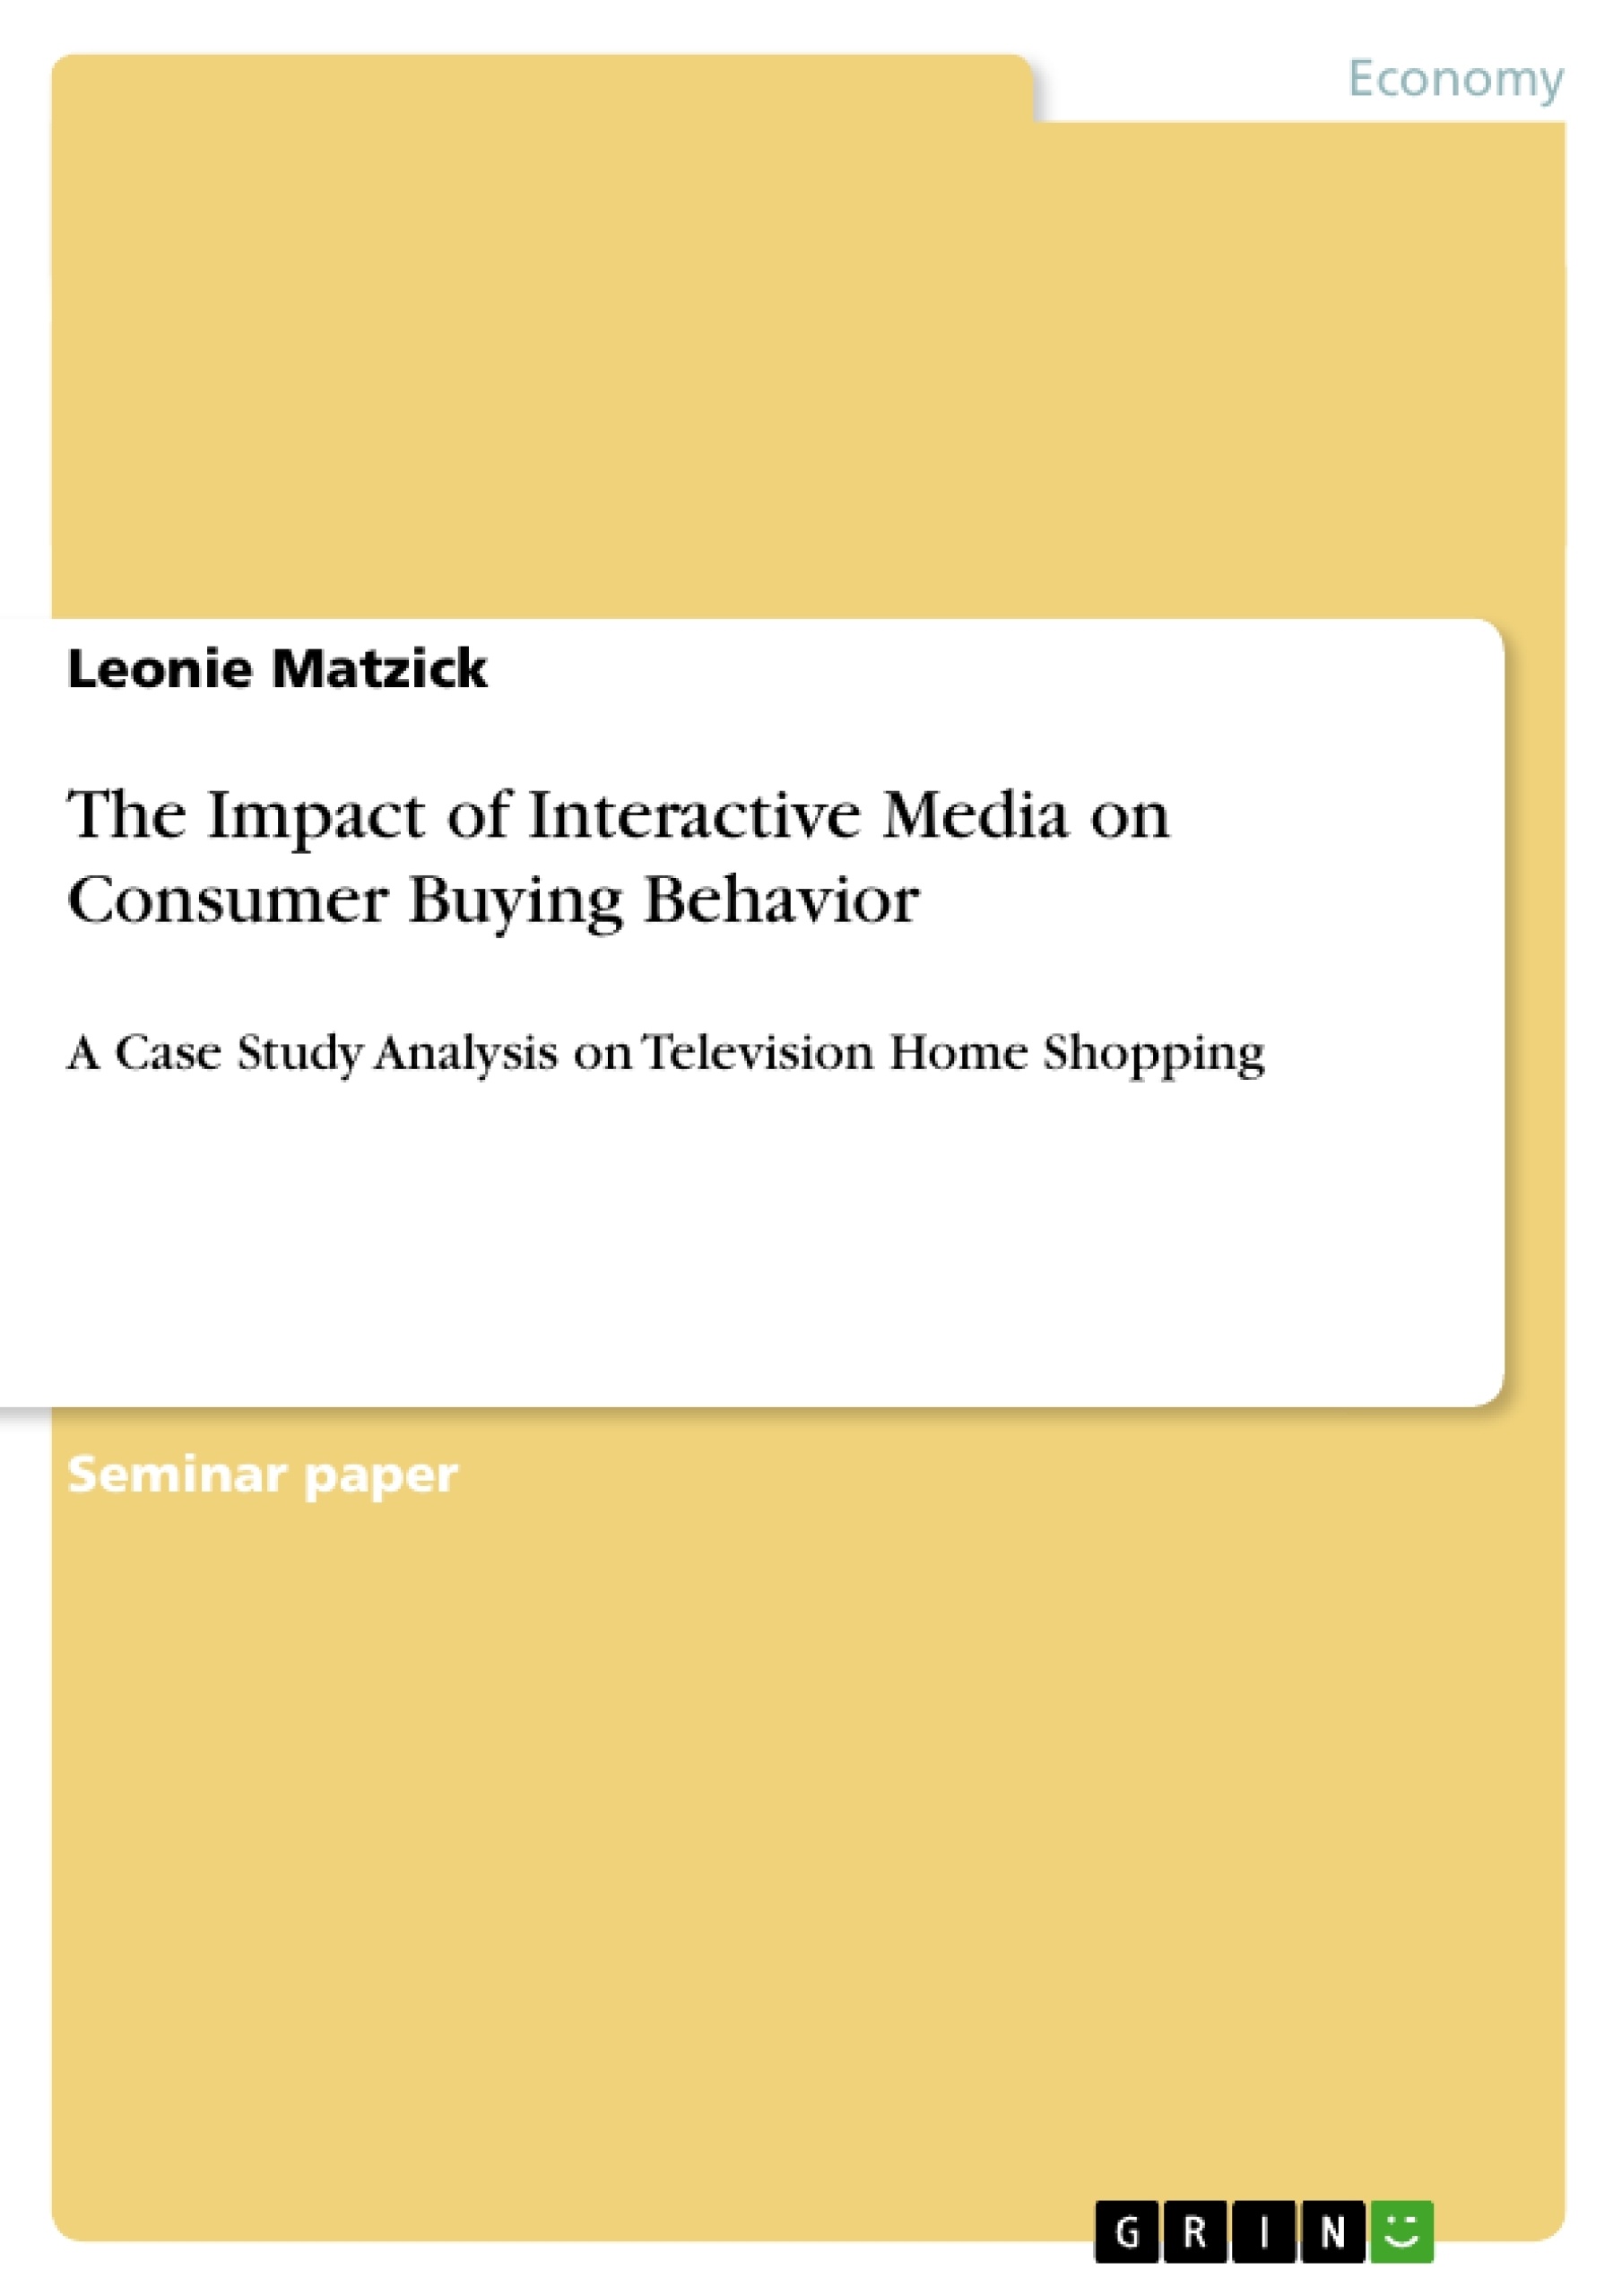 Título: The Impact of Interactive Media on Consumer Buying Behavior